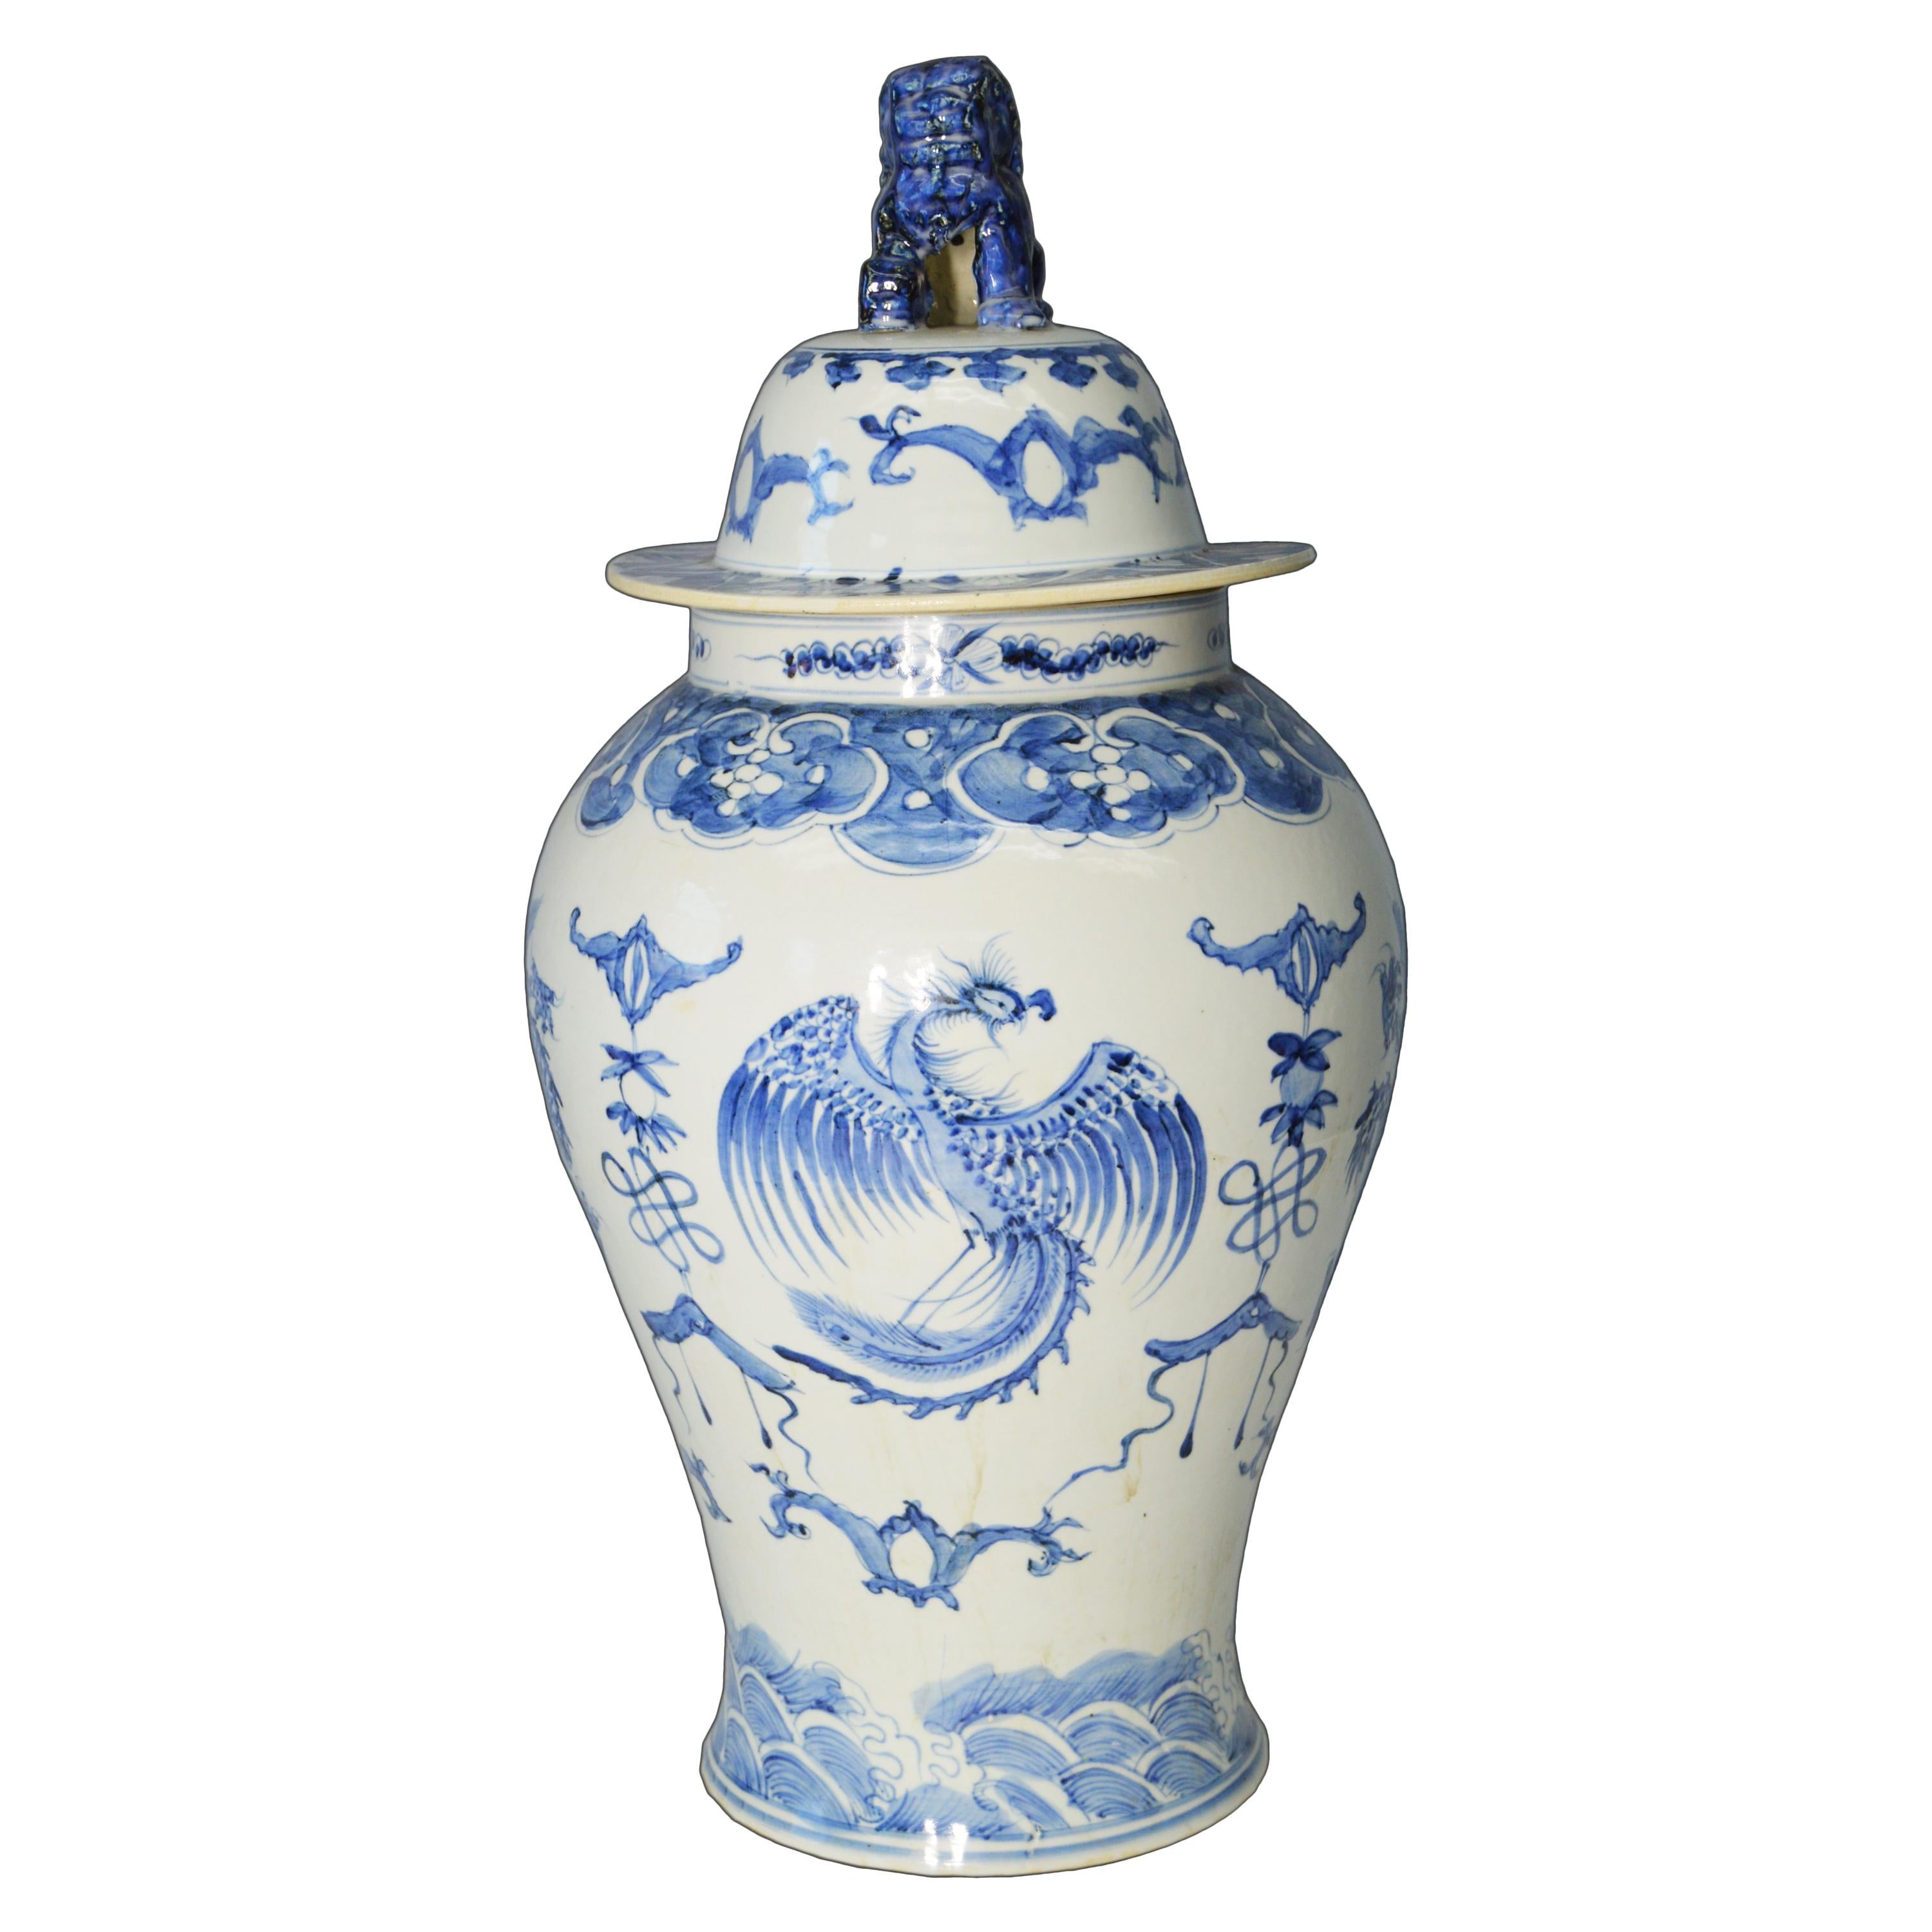 Chinese Vintage Hand-Painted Blue and White Porcelain Vase with Dragon